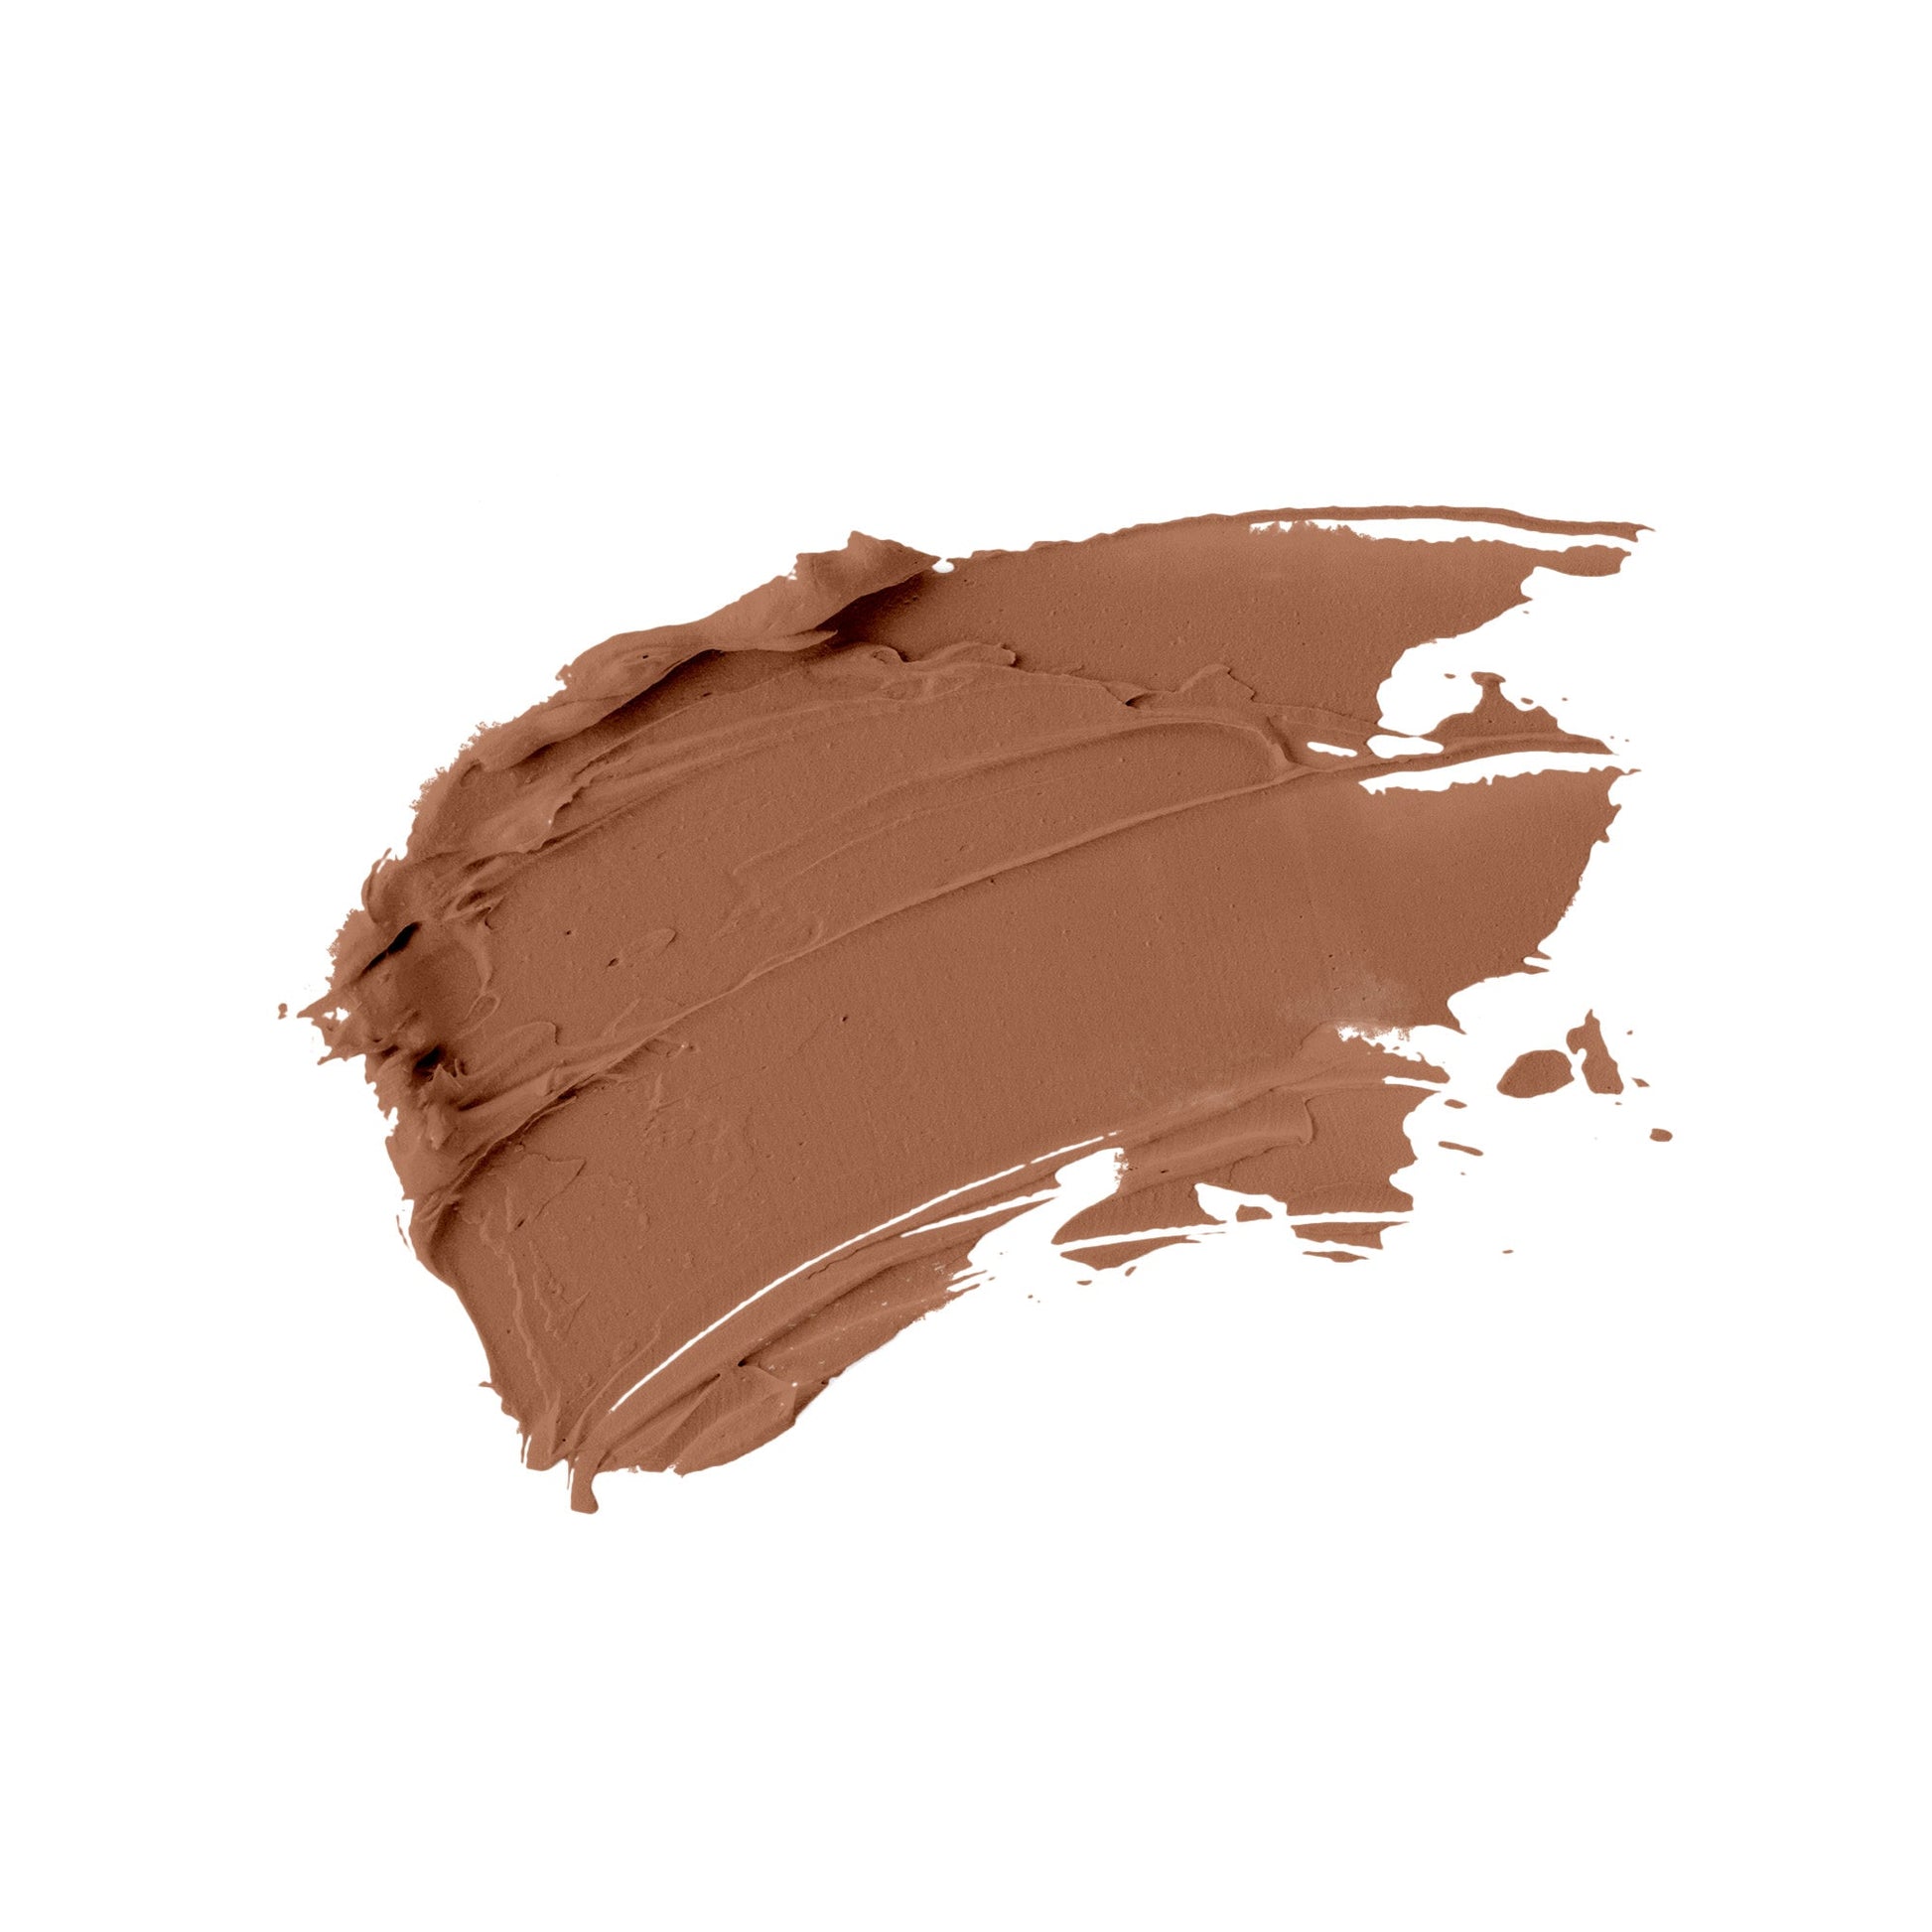 Swatch of medium ivory tone of an oil free natural non-toxic liquid foundation